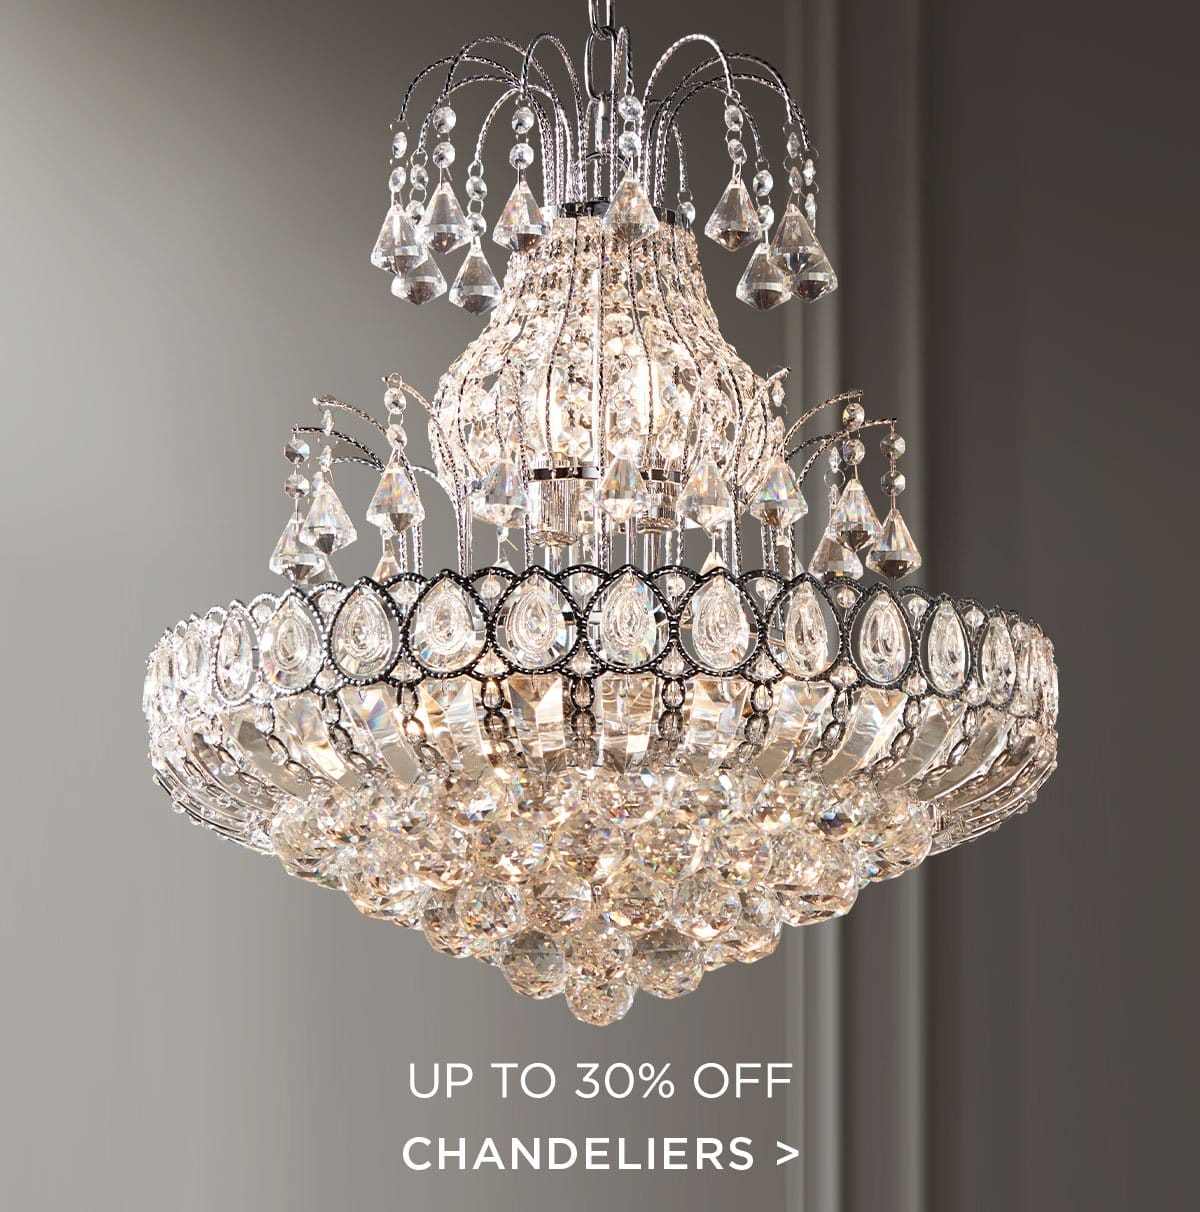 Up to 30% Off - Chandeliers >